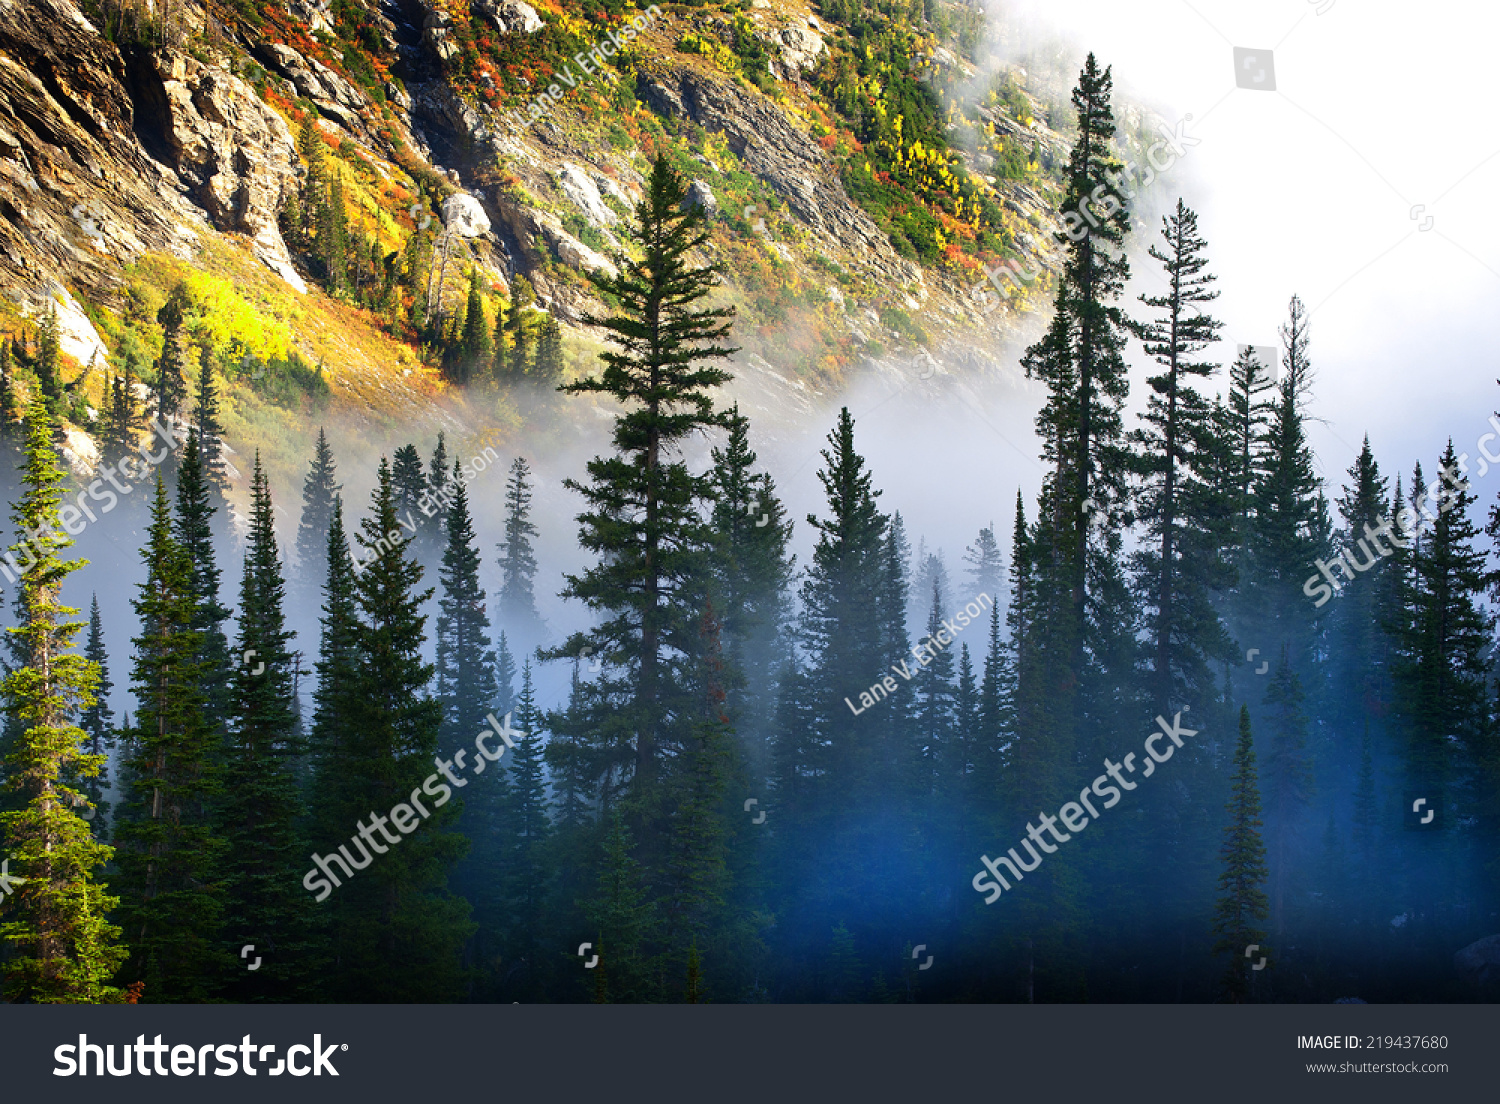 Fog and pine tree on rugged mountainside during storm #219437680